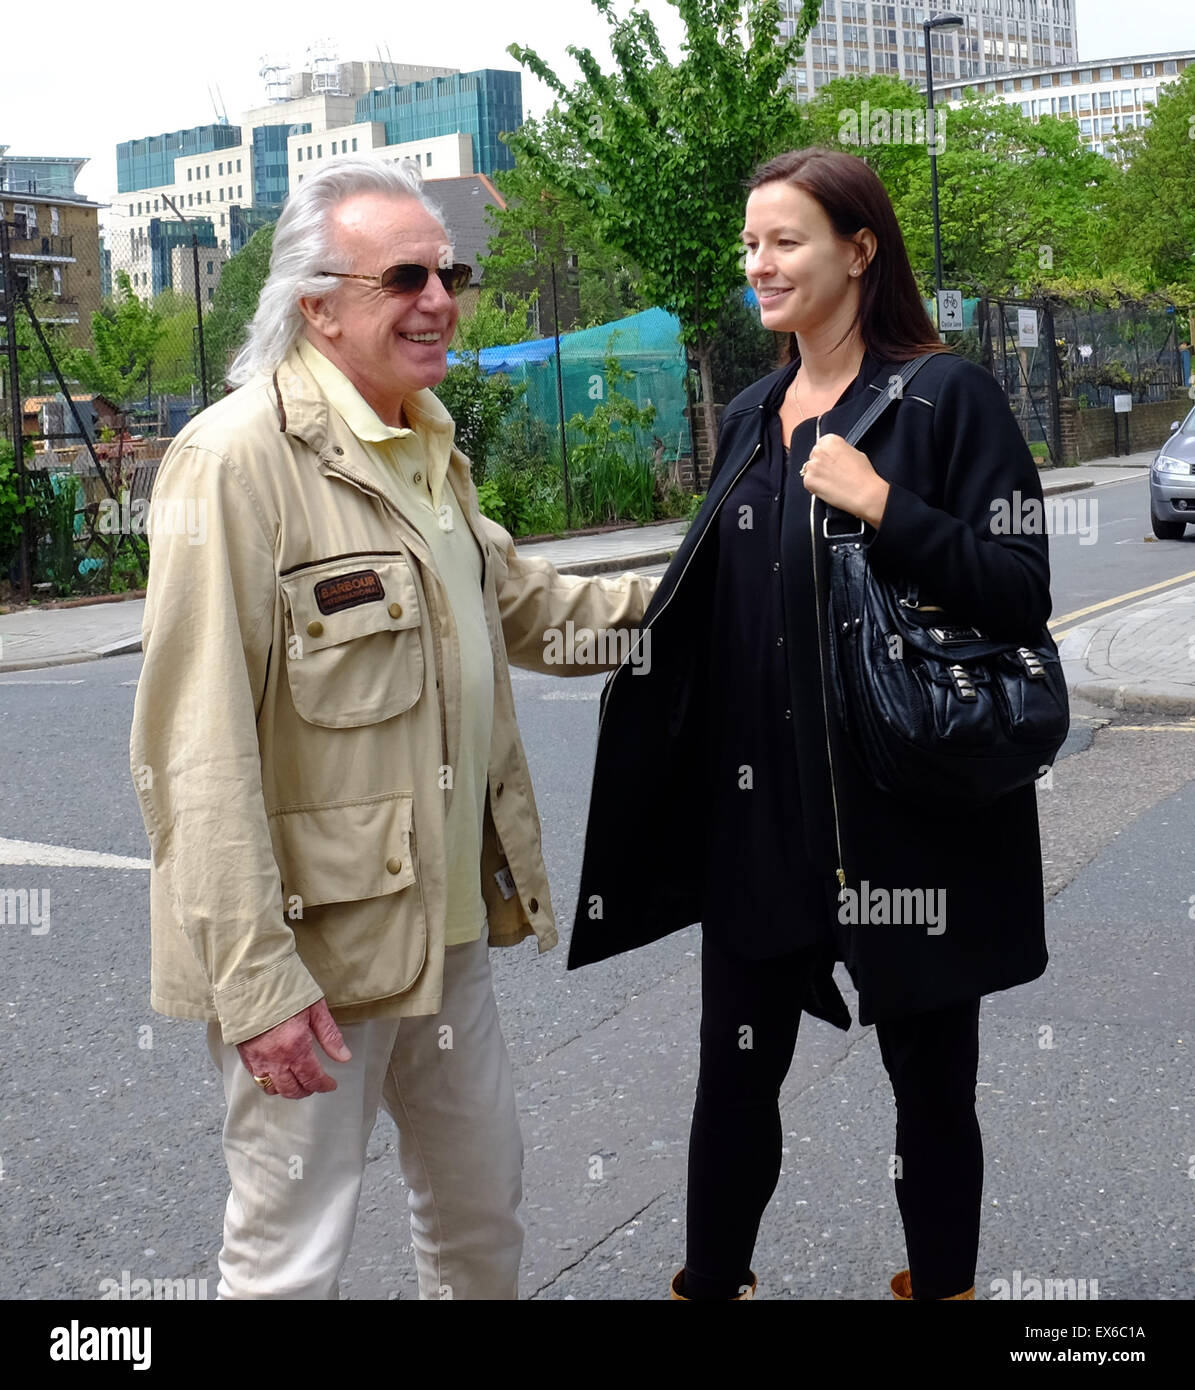 Peter Stringfellow and wife Bella Wright on their way back from casting their vote in Vauxhall. The couple reportedly said they had voted Conservative.  Featuring: Peter Stringfellow, Bella Wright Where: London, United Kingdom When: 07 May 2015 Stock Photo